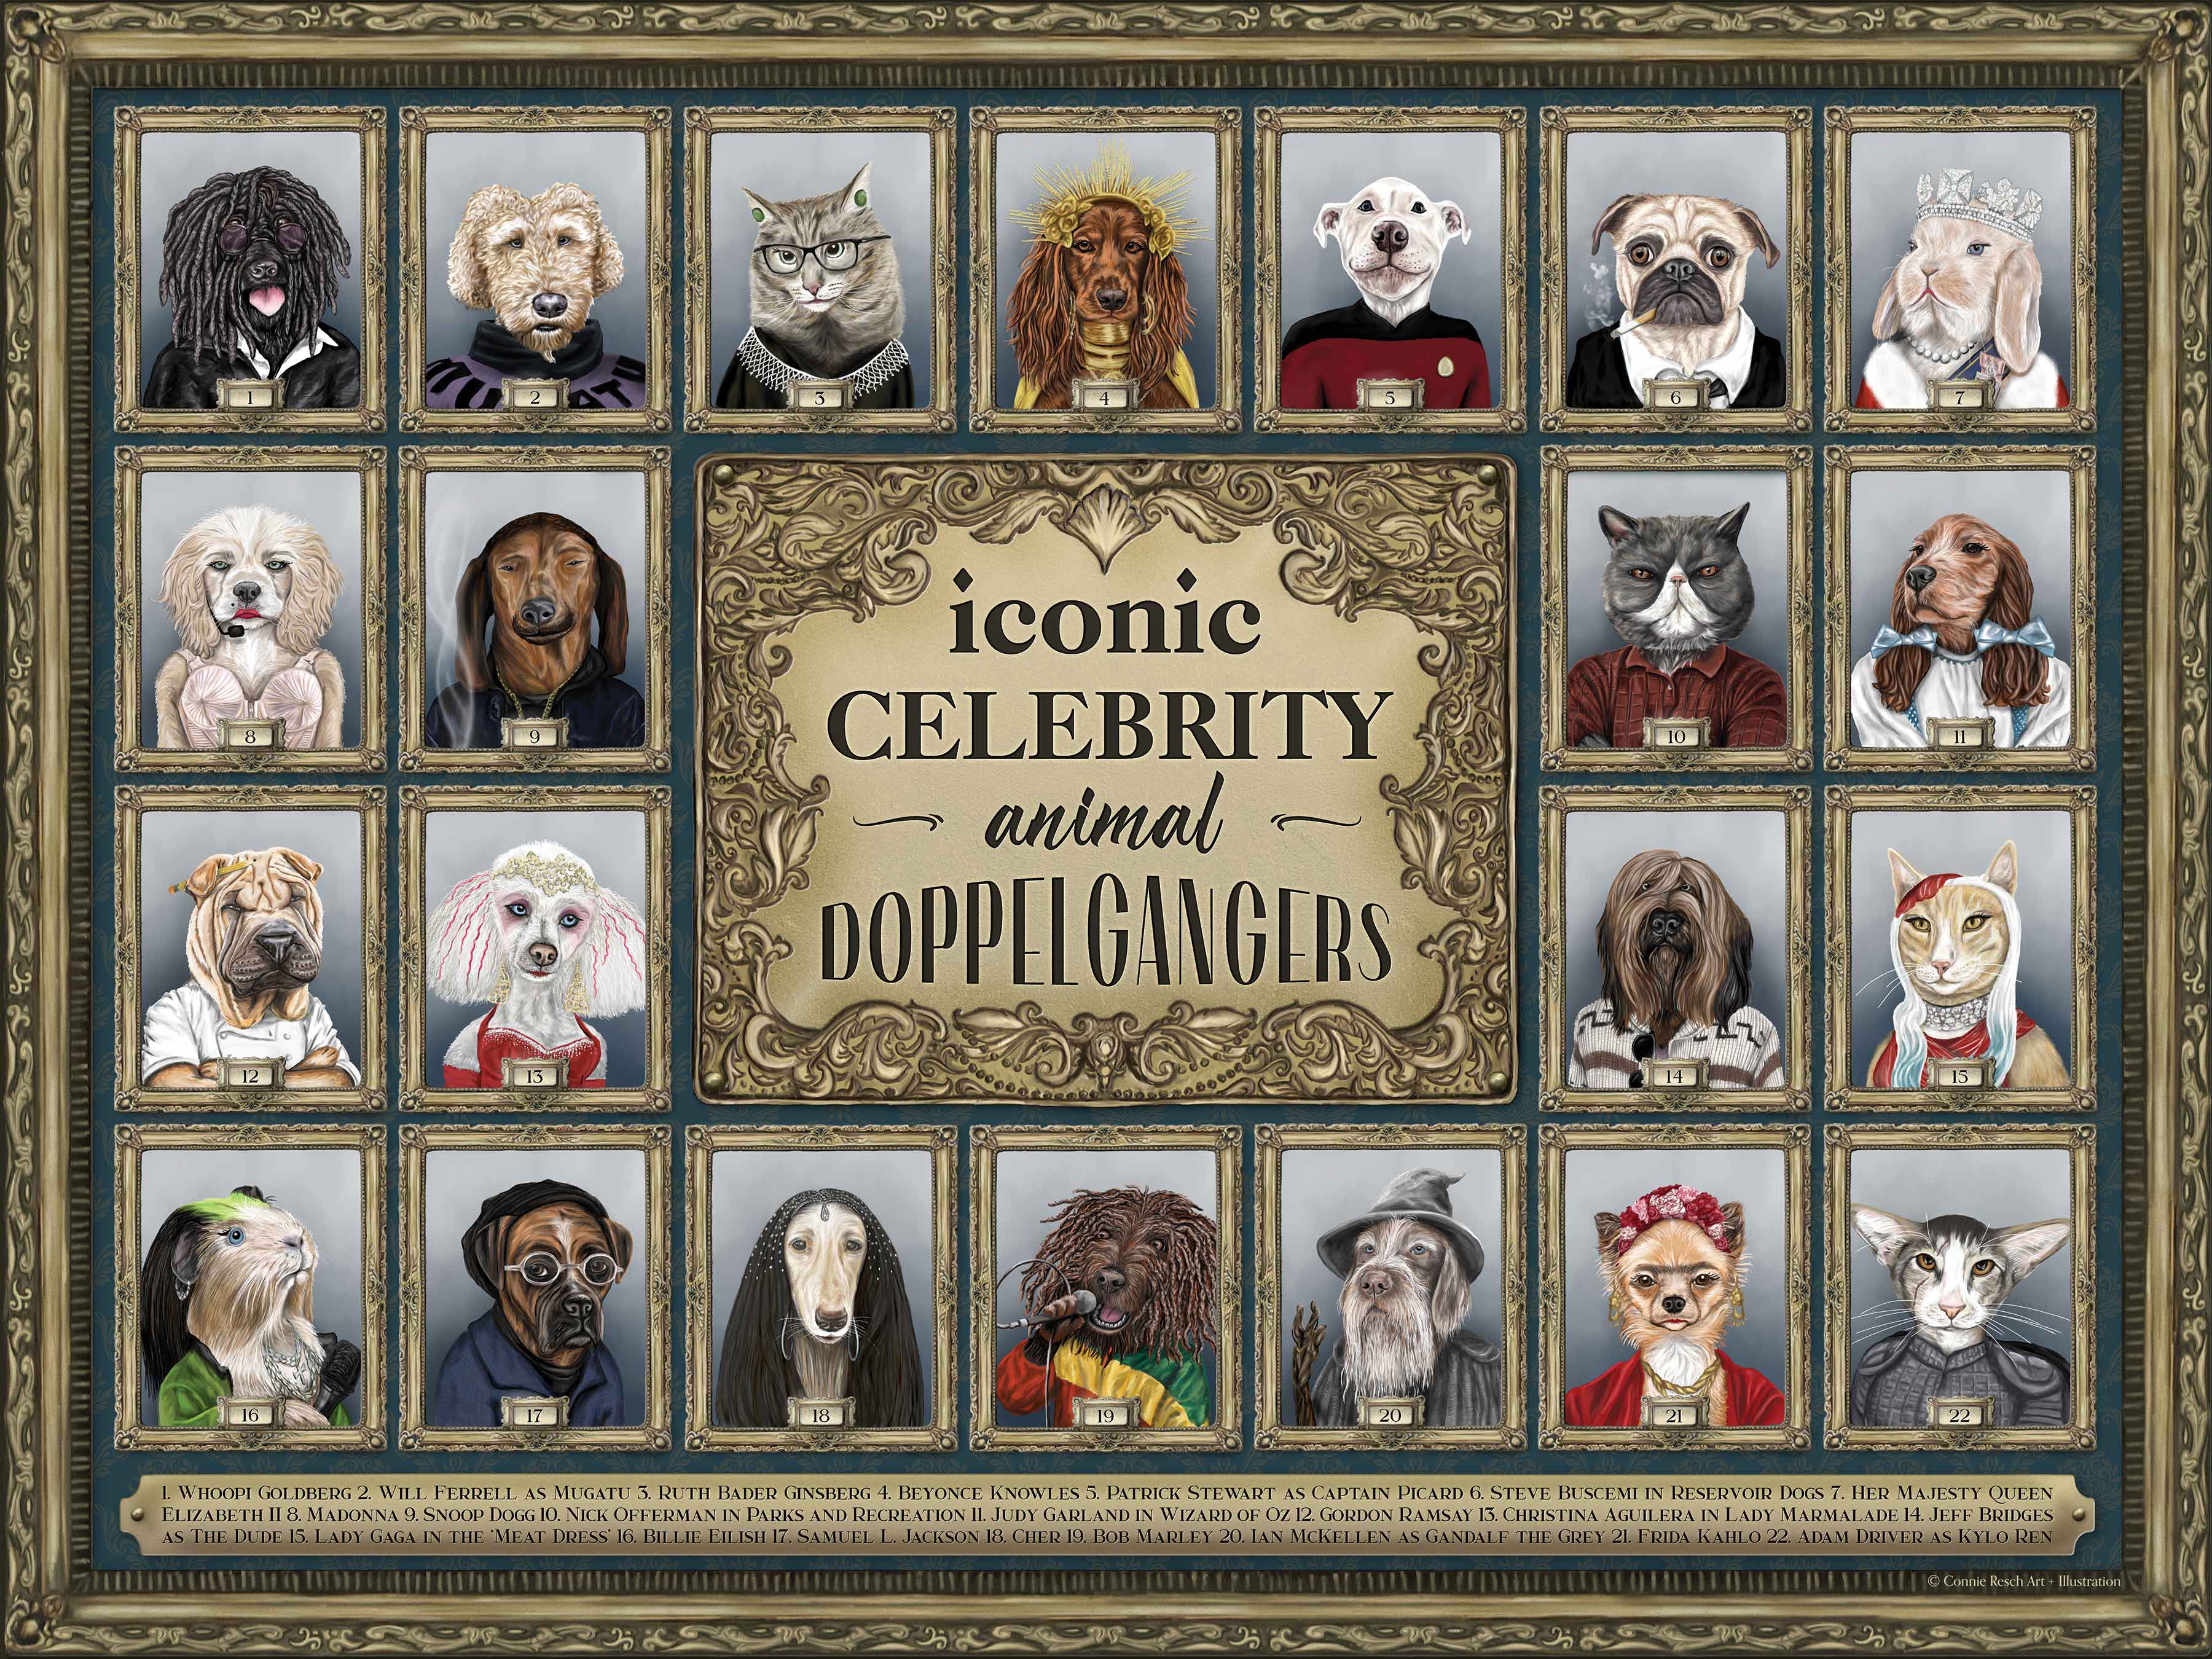 A puzzle gallery of celebrity animal doppelgangers with artist Connie Reshs whimsical collection of animal superstar look-alikes.